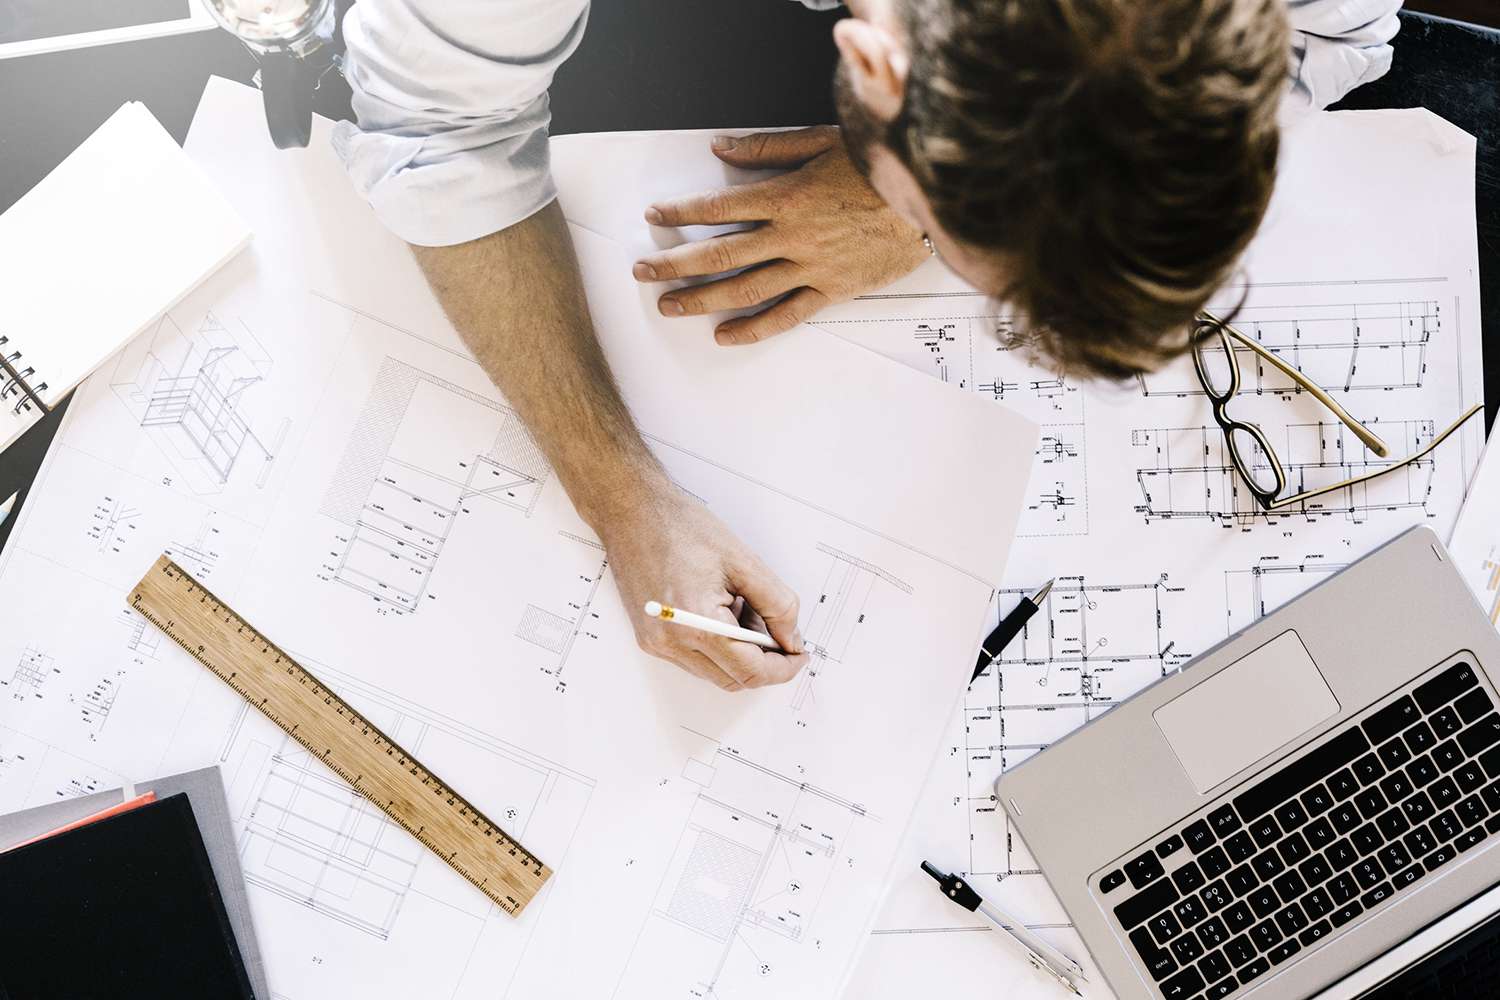 Man Working on Construction Plan at Desk